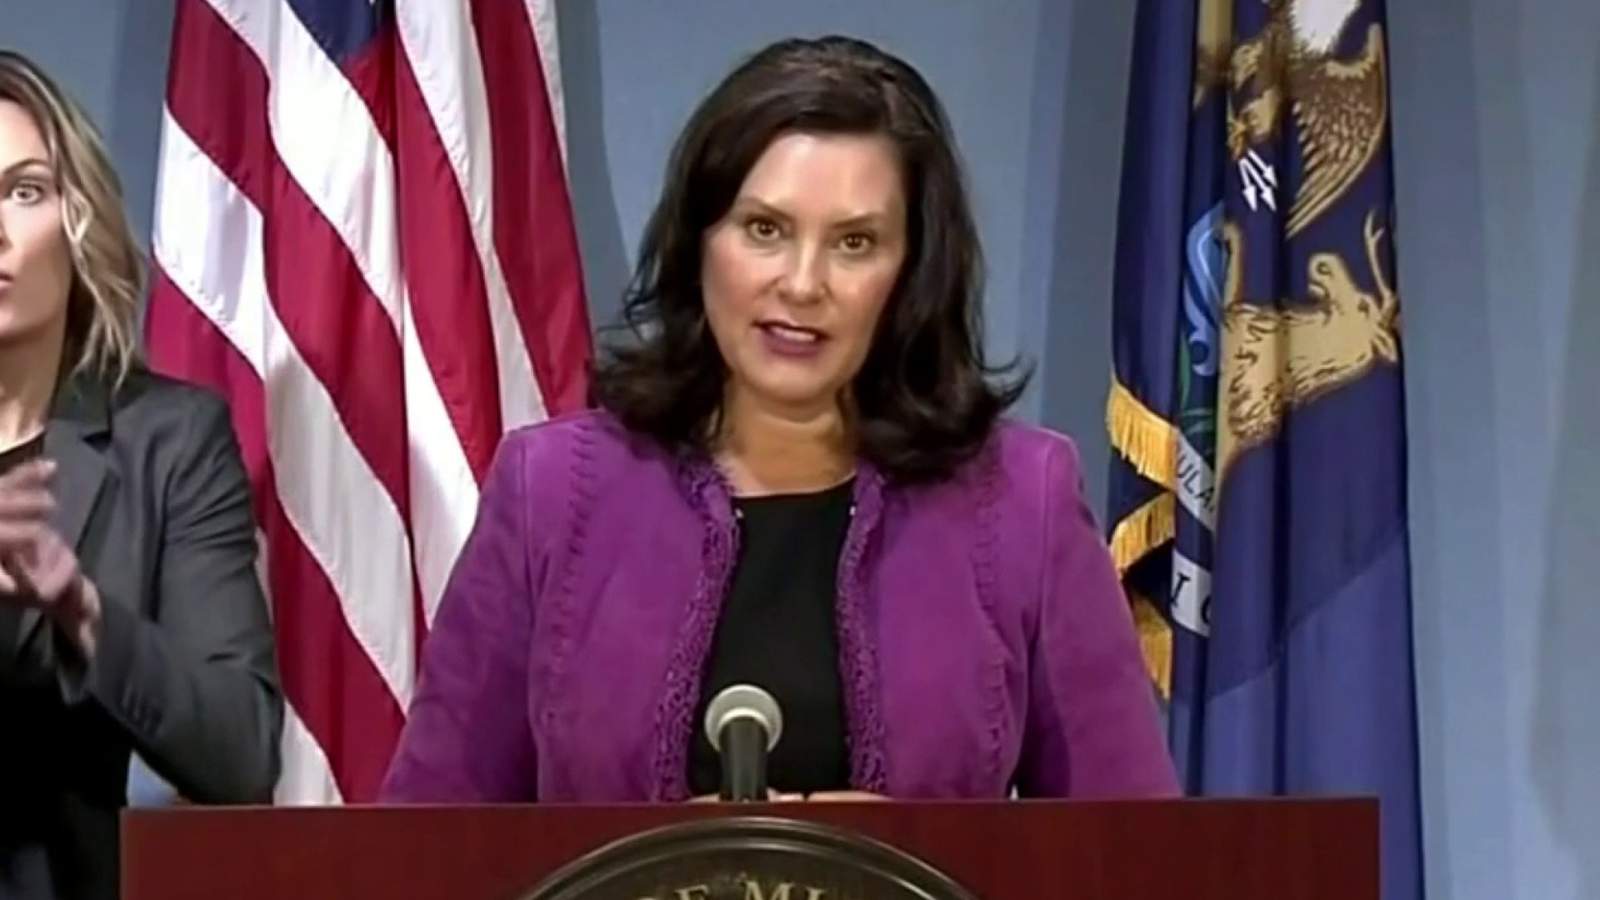 FBI: Group plotting to kidnap Michigan Gov. Whitmer wanted to take her to Wisconsin for ‘trial’